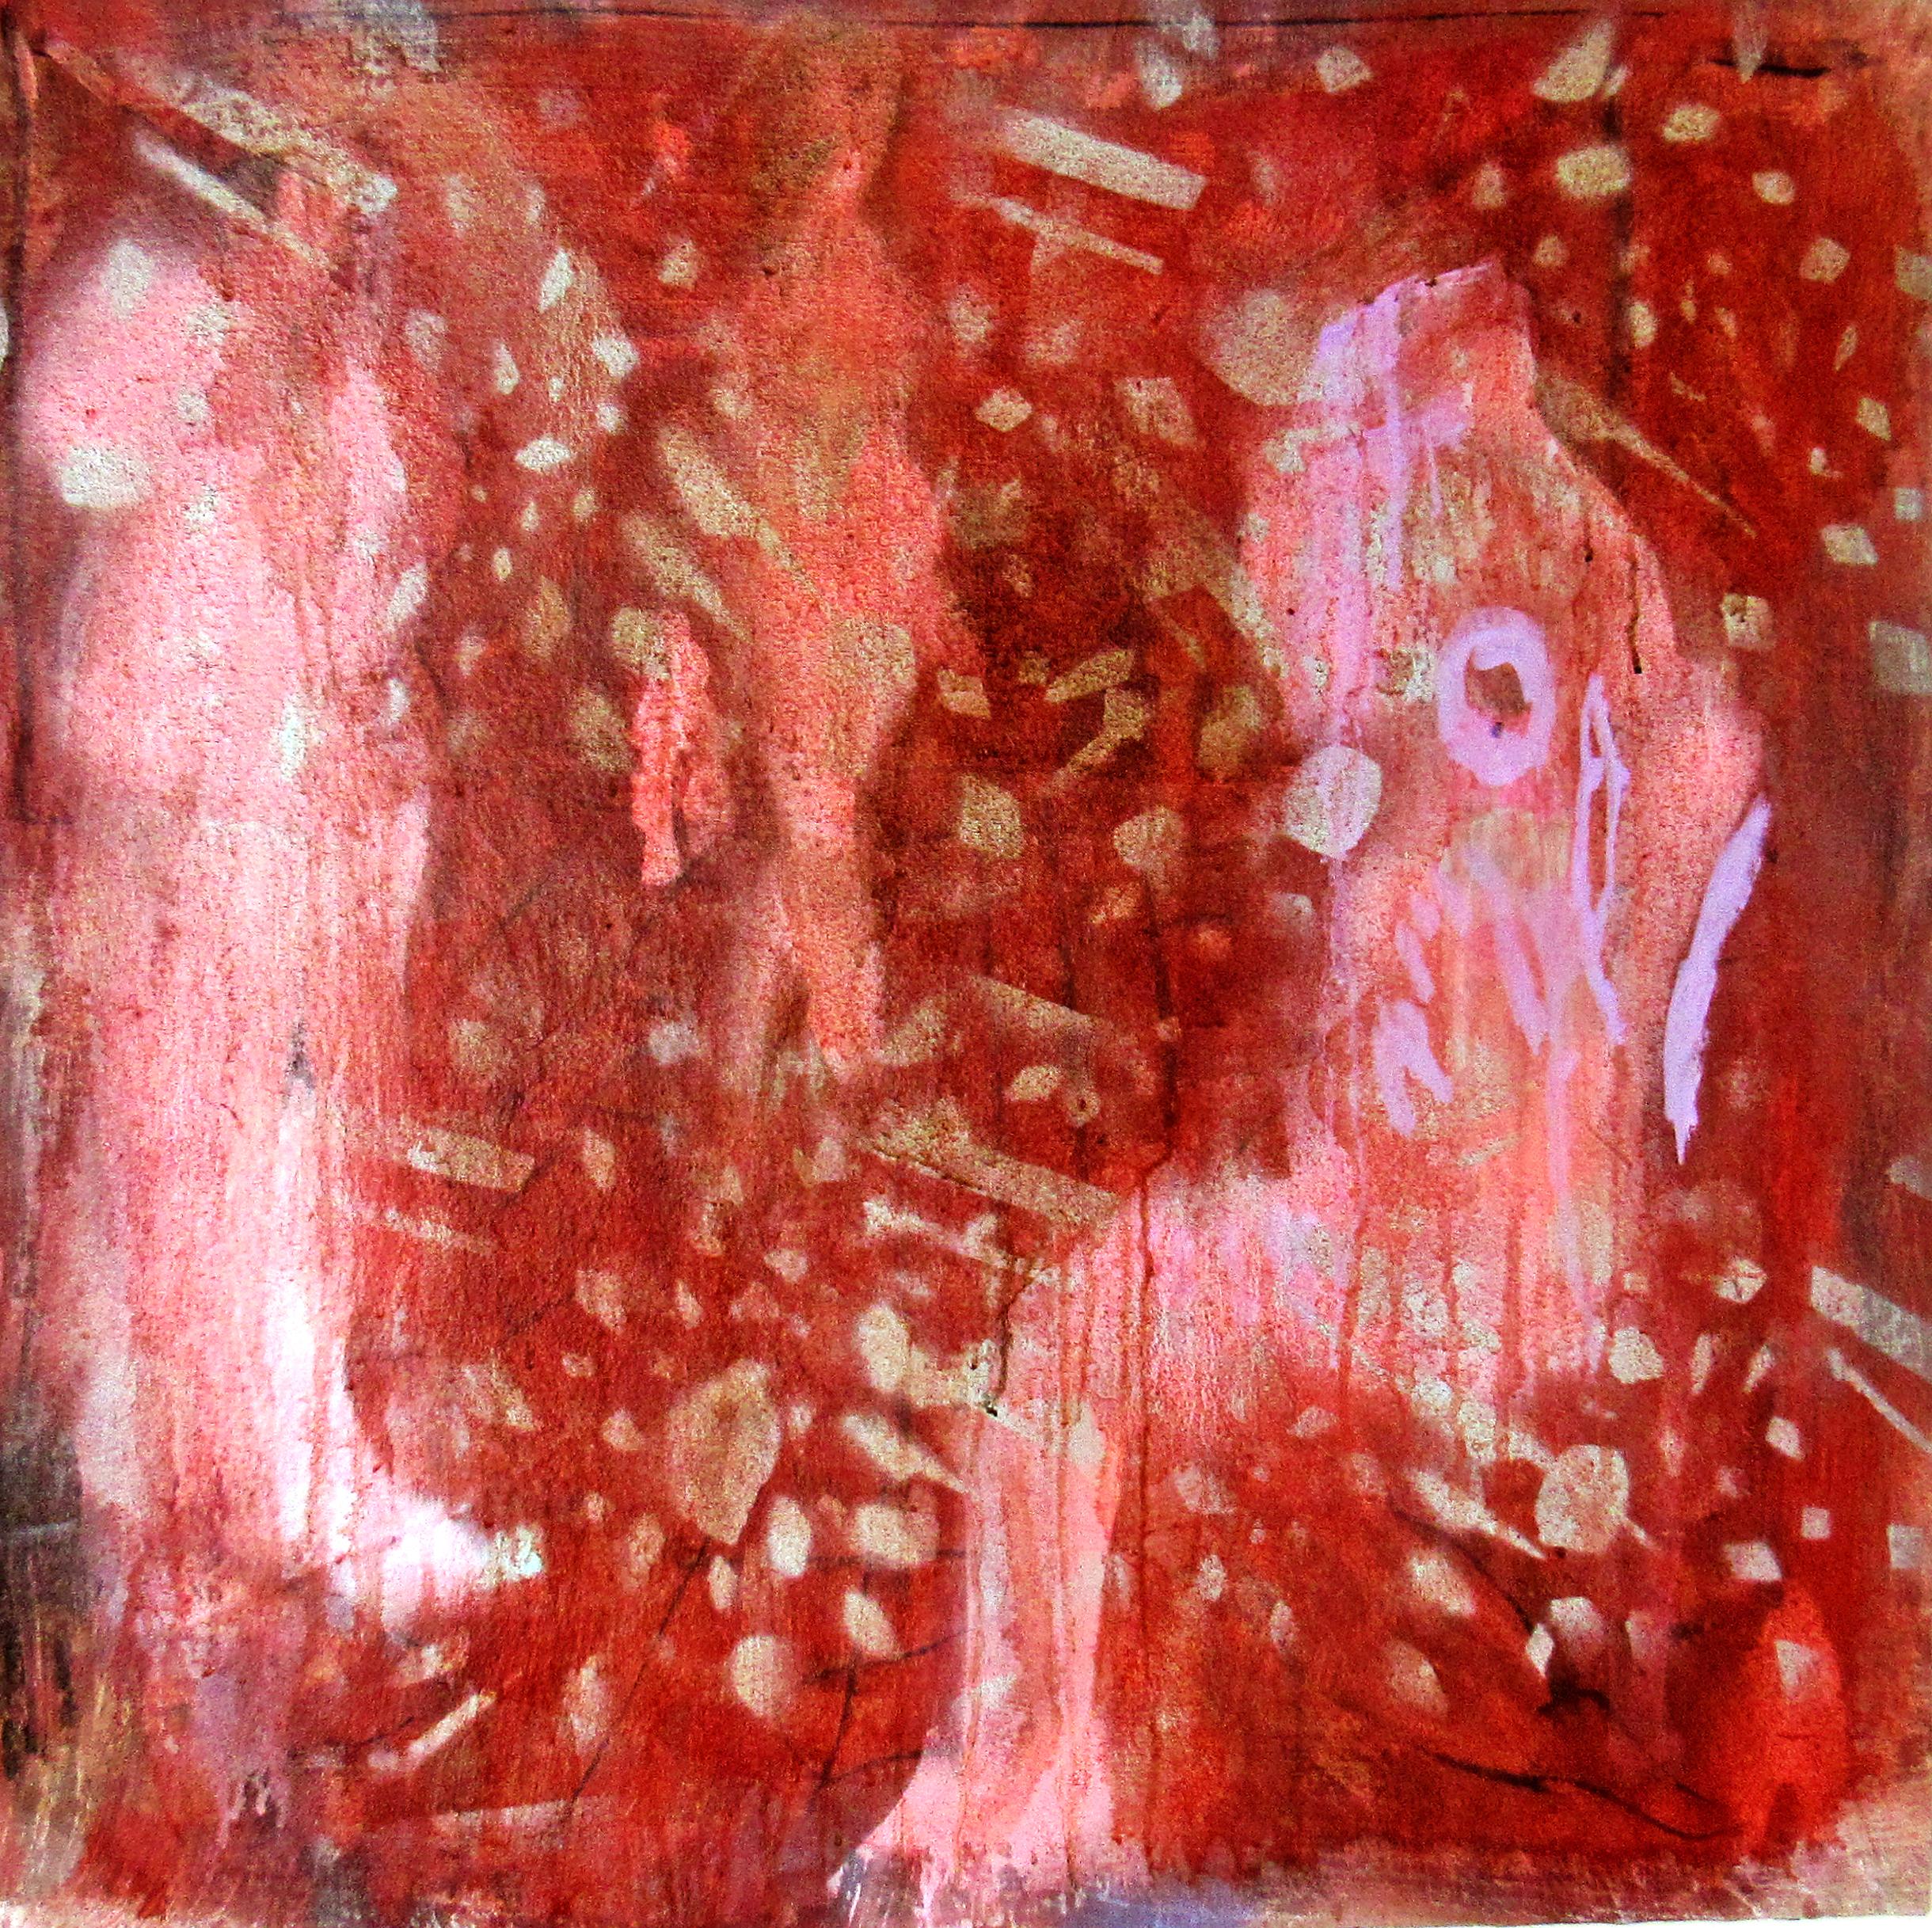 Eurydice, red gestural abstract w figures